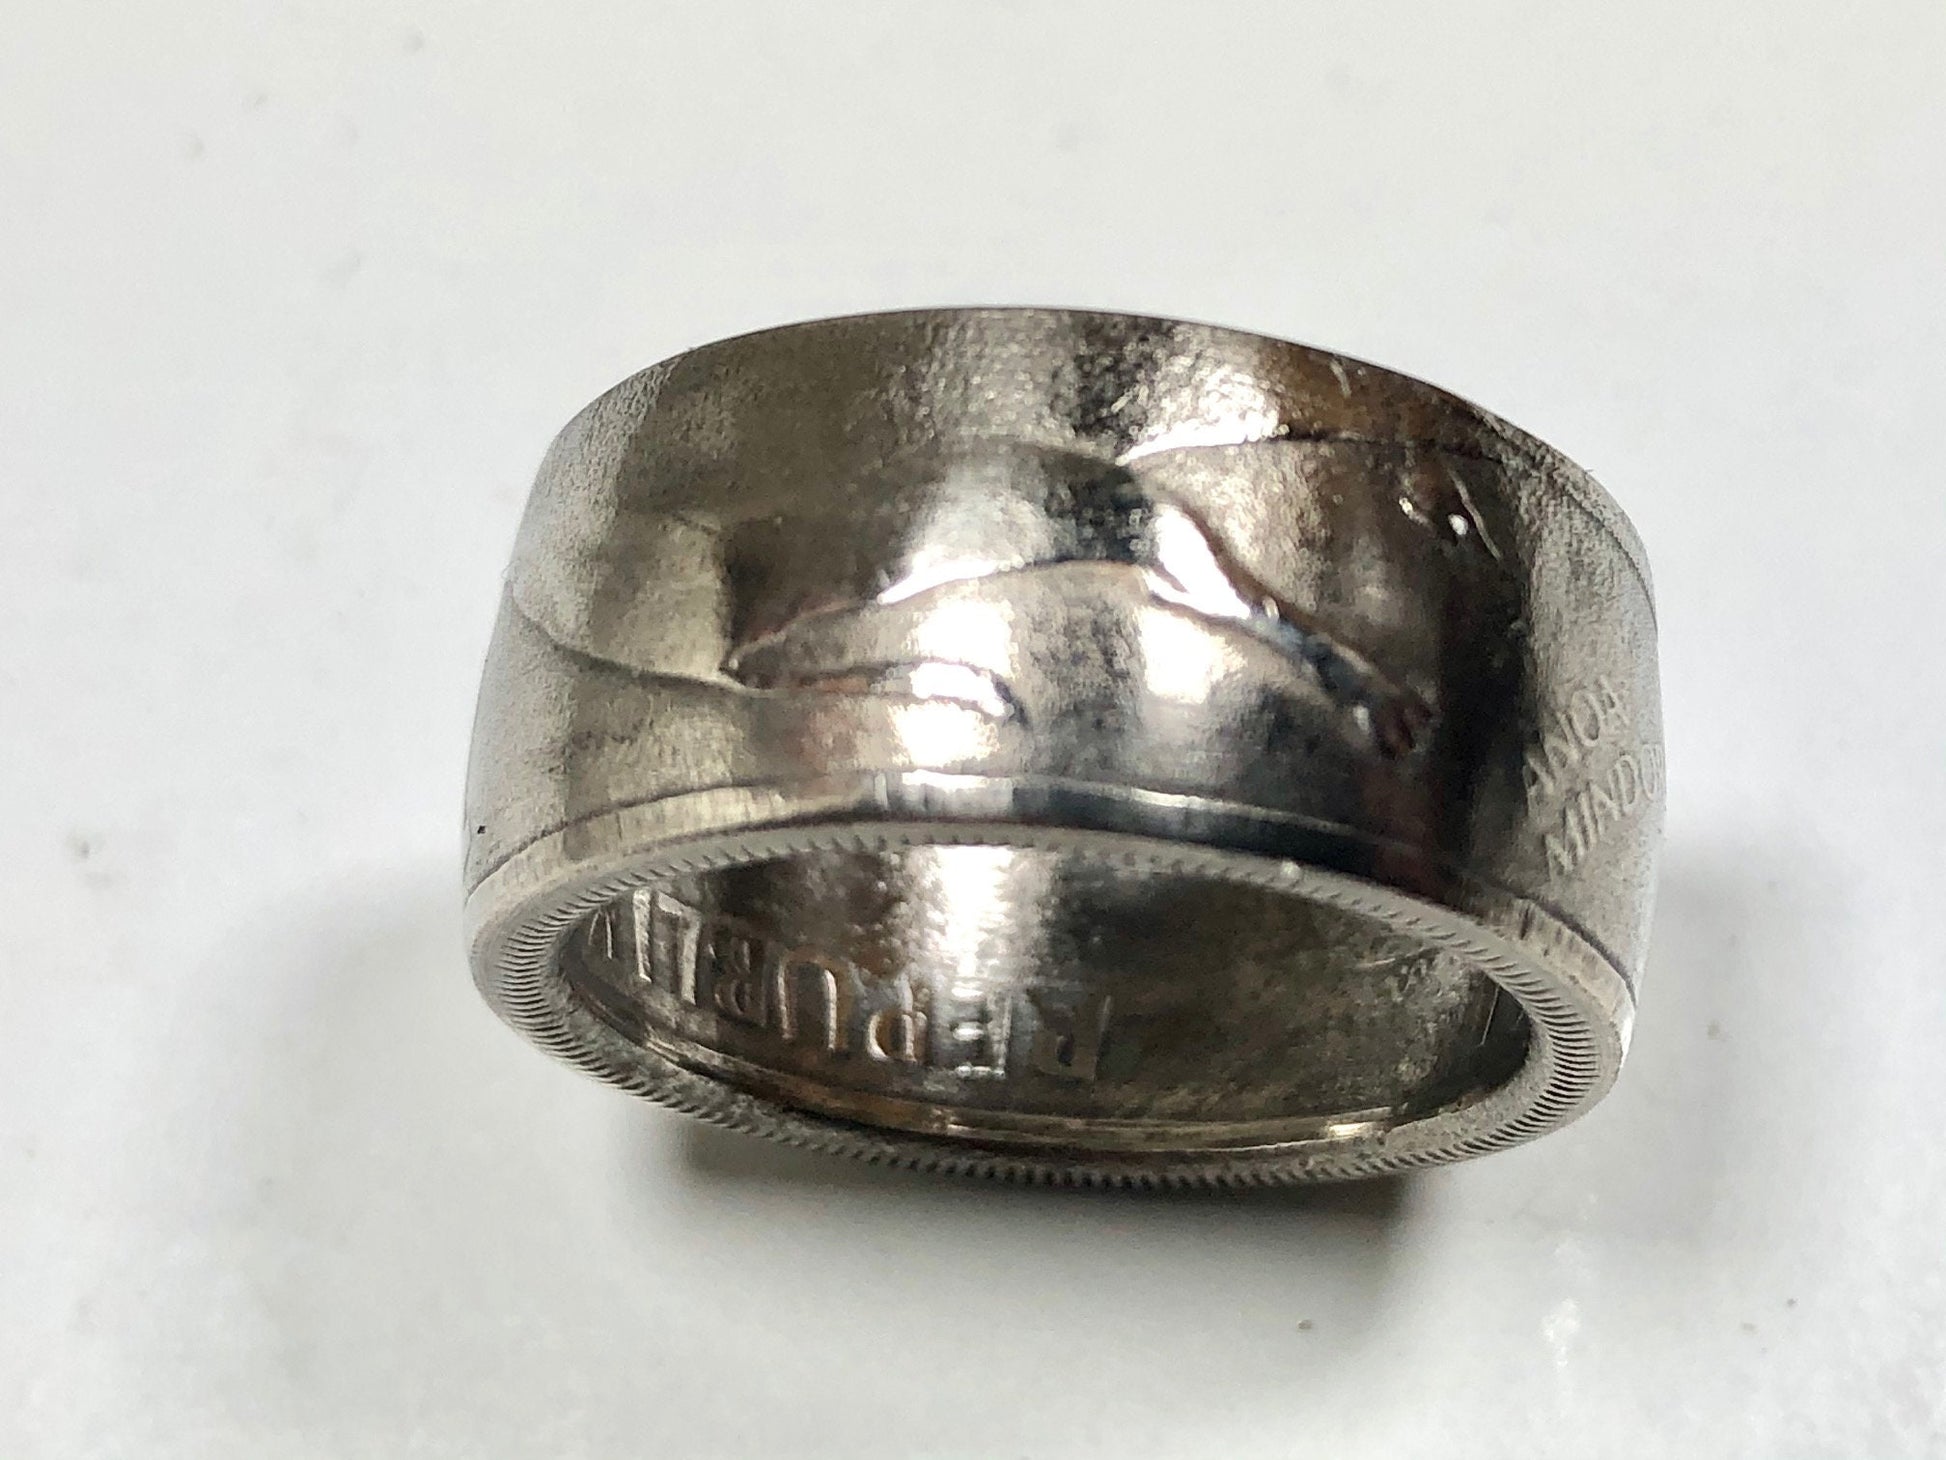 Philippines 1 Piso Philippine Coin Ring Handmade Jewelry Gift For Friend Coin Ring Gift For Him Her World Coins Collector